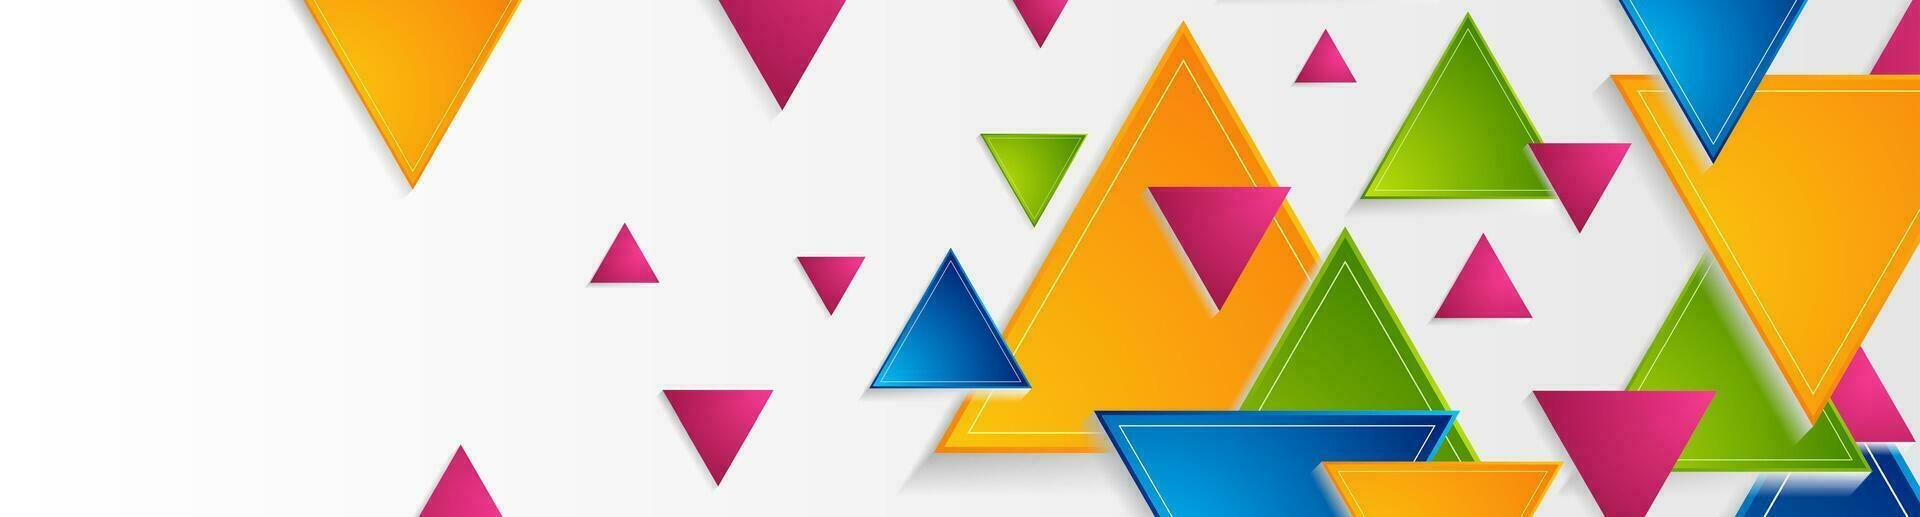 Colorful triangles abstract geometric background vector